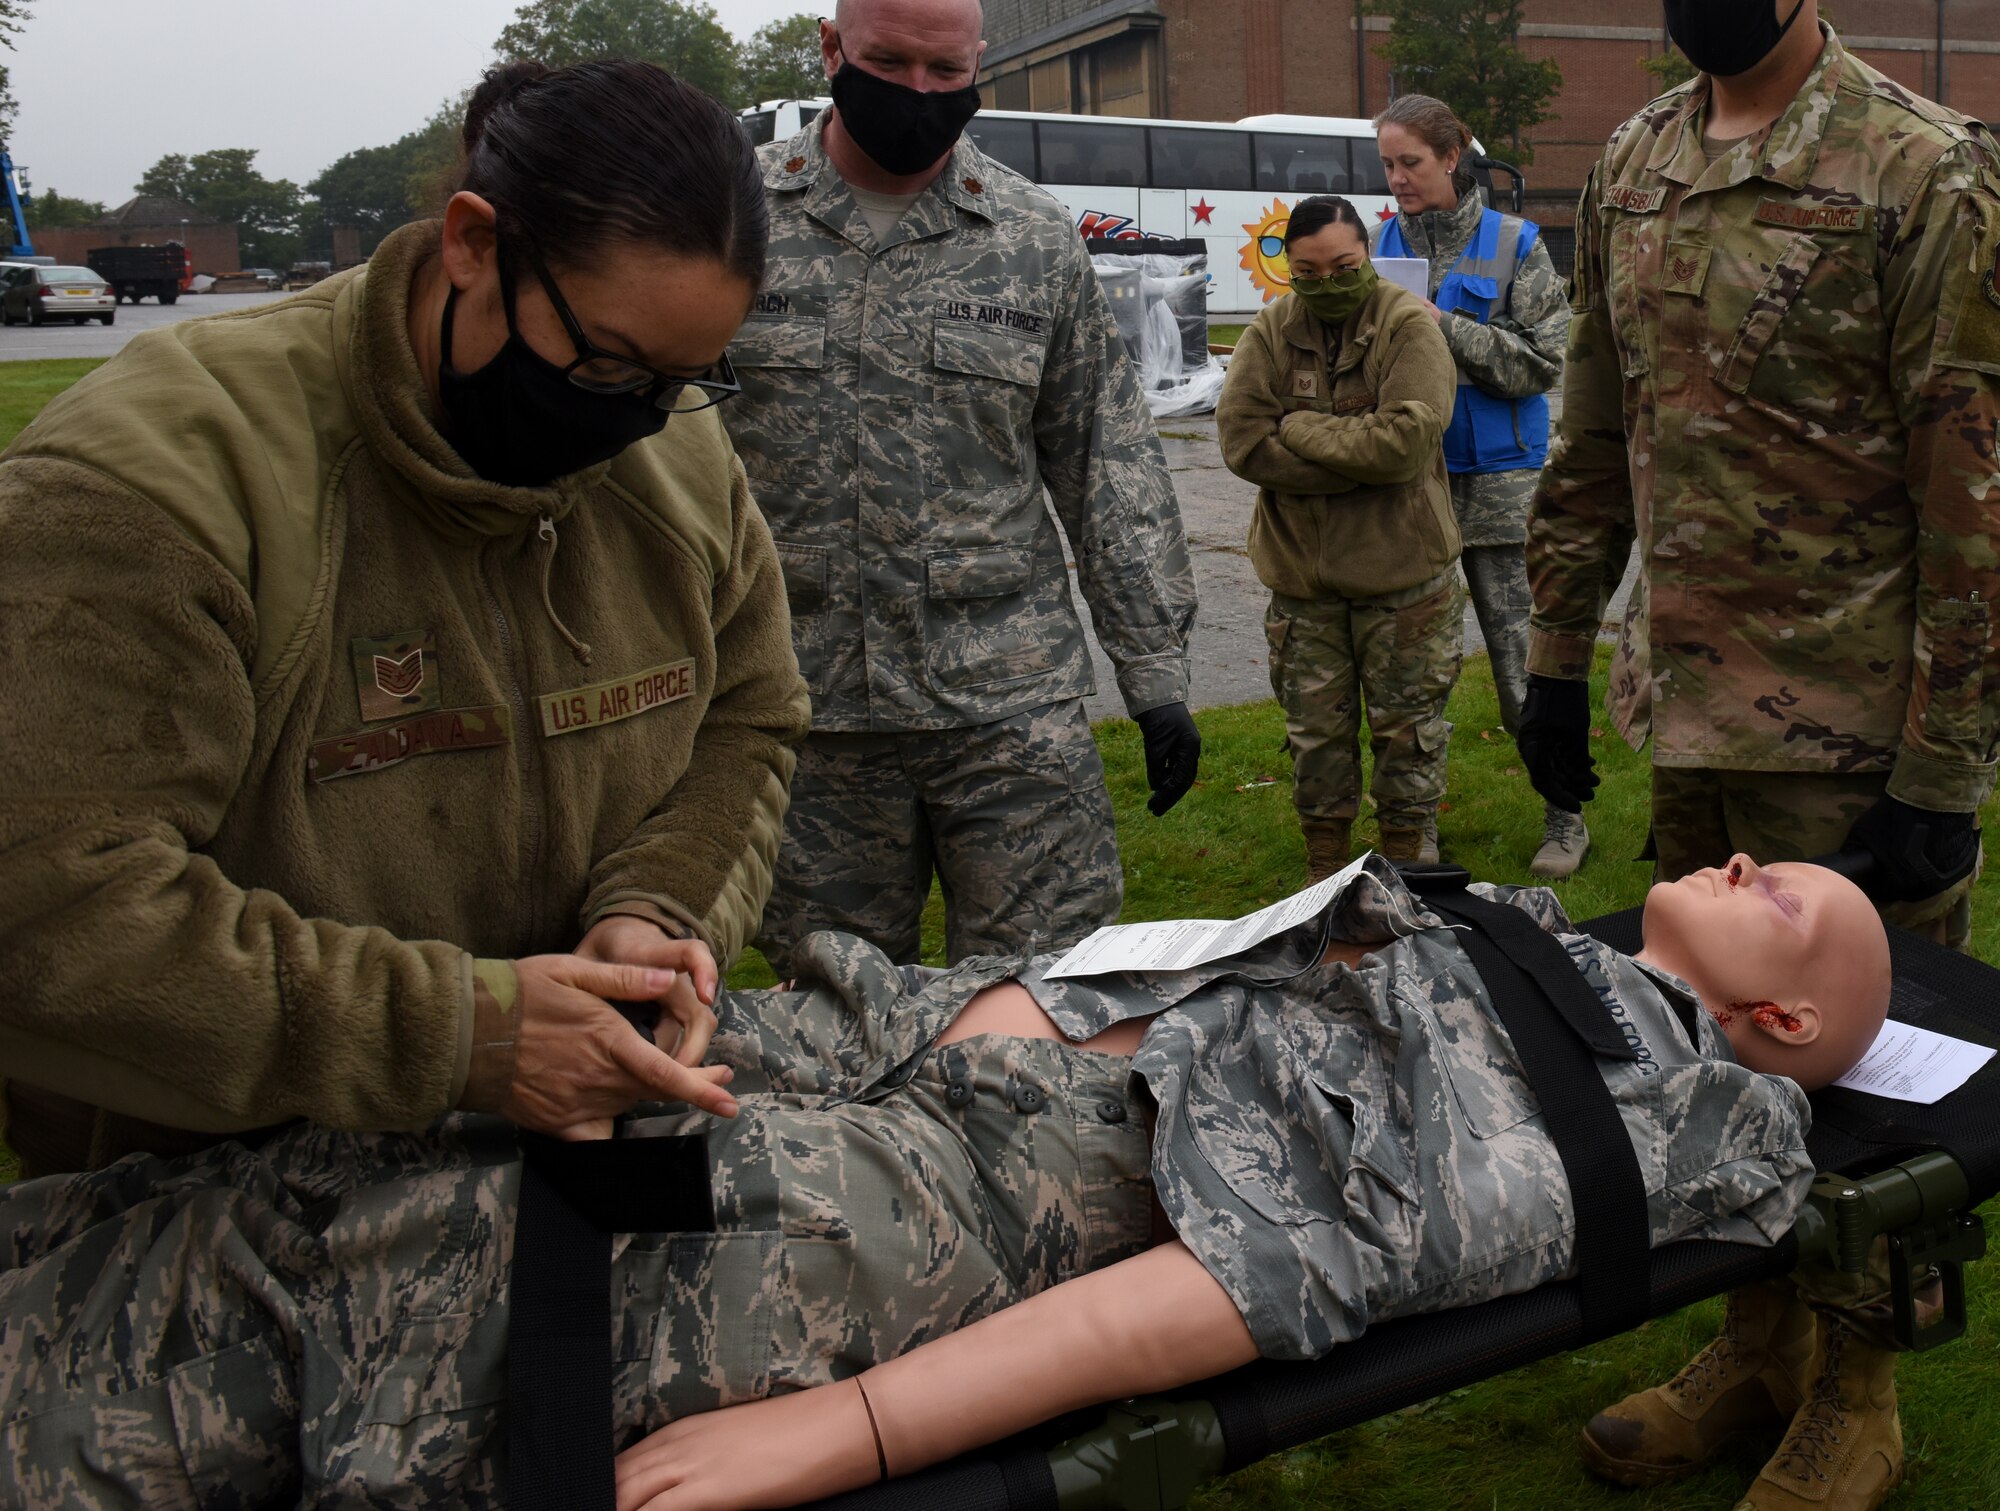 An Airman assigned to the 48th Fighter Wing Medical Group secures a medical simulation manikin during Mission Assurance Exercise 20-20 at Royal Air Force Feltwell, England, Sept. 29, 2020. During the exercise, medical personnel received unique training and challenged their proficiency, practicing medical skills and procedures while treating simulated injuries in a forward operating location. (U.S. Air Force photo by Airman 1st Class Rhonda Smith)